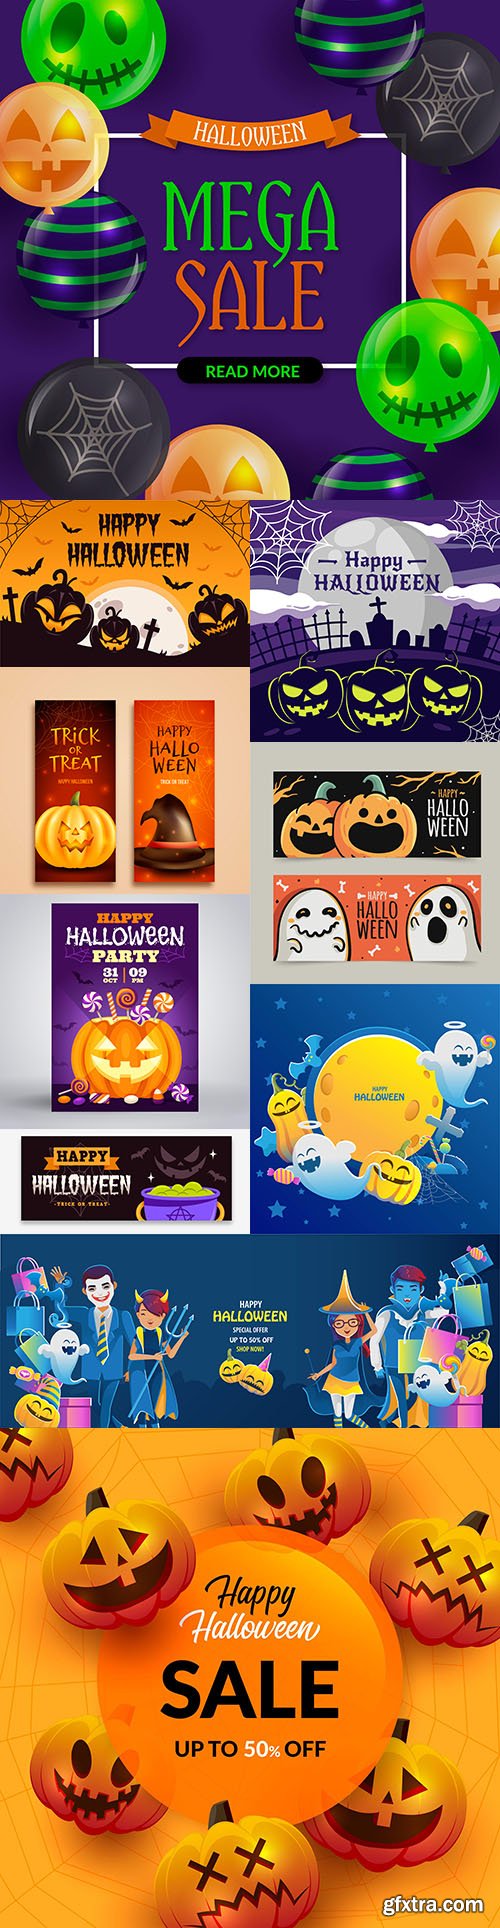 Happy Halloween holiday banner illustration collection 6
